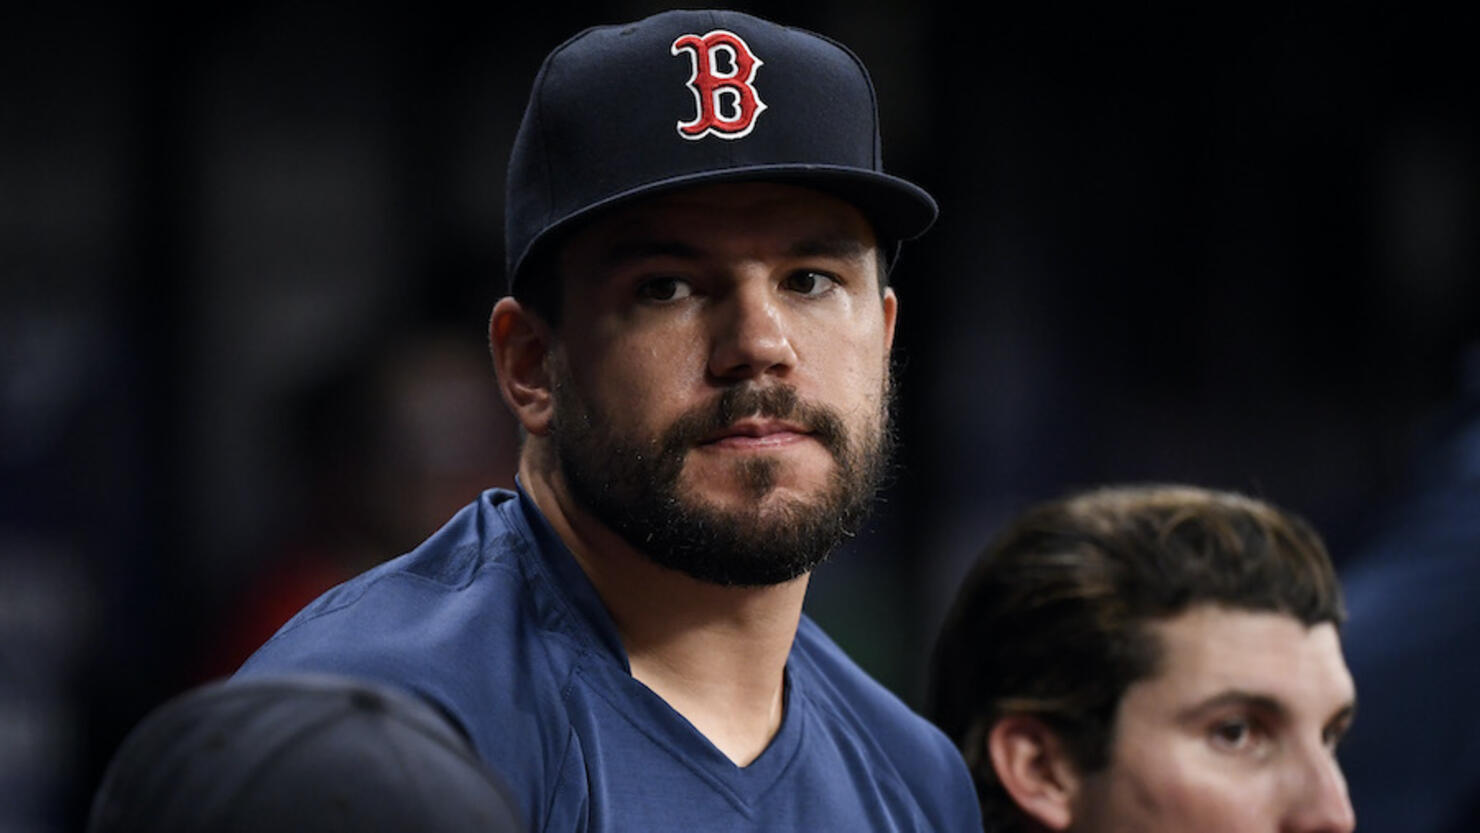 Major Update On Kyle Schwarber's Playing Status For Red Sox